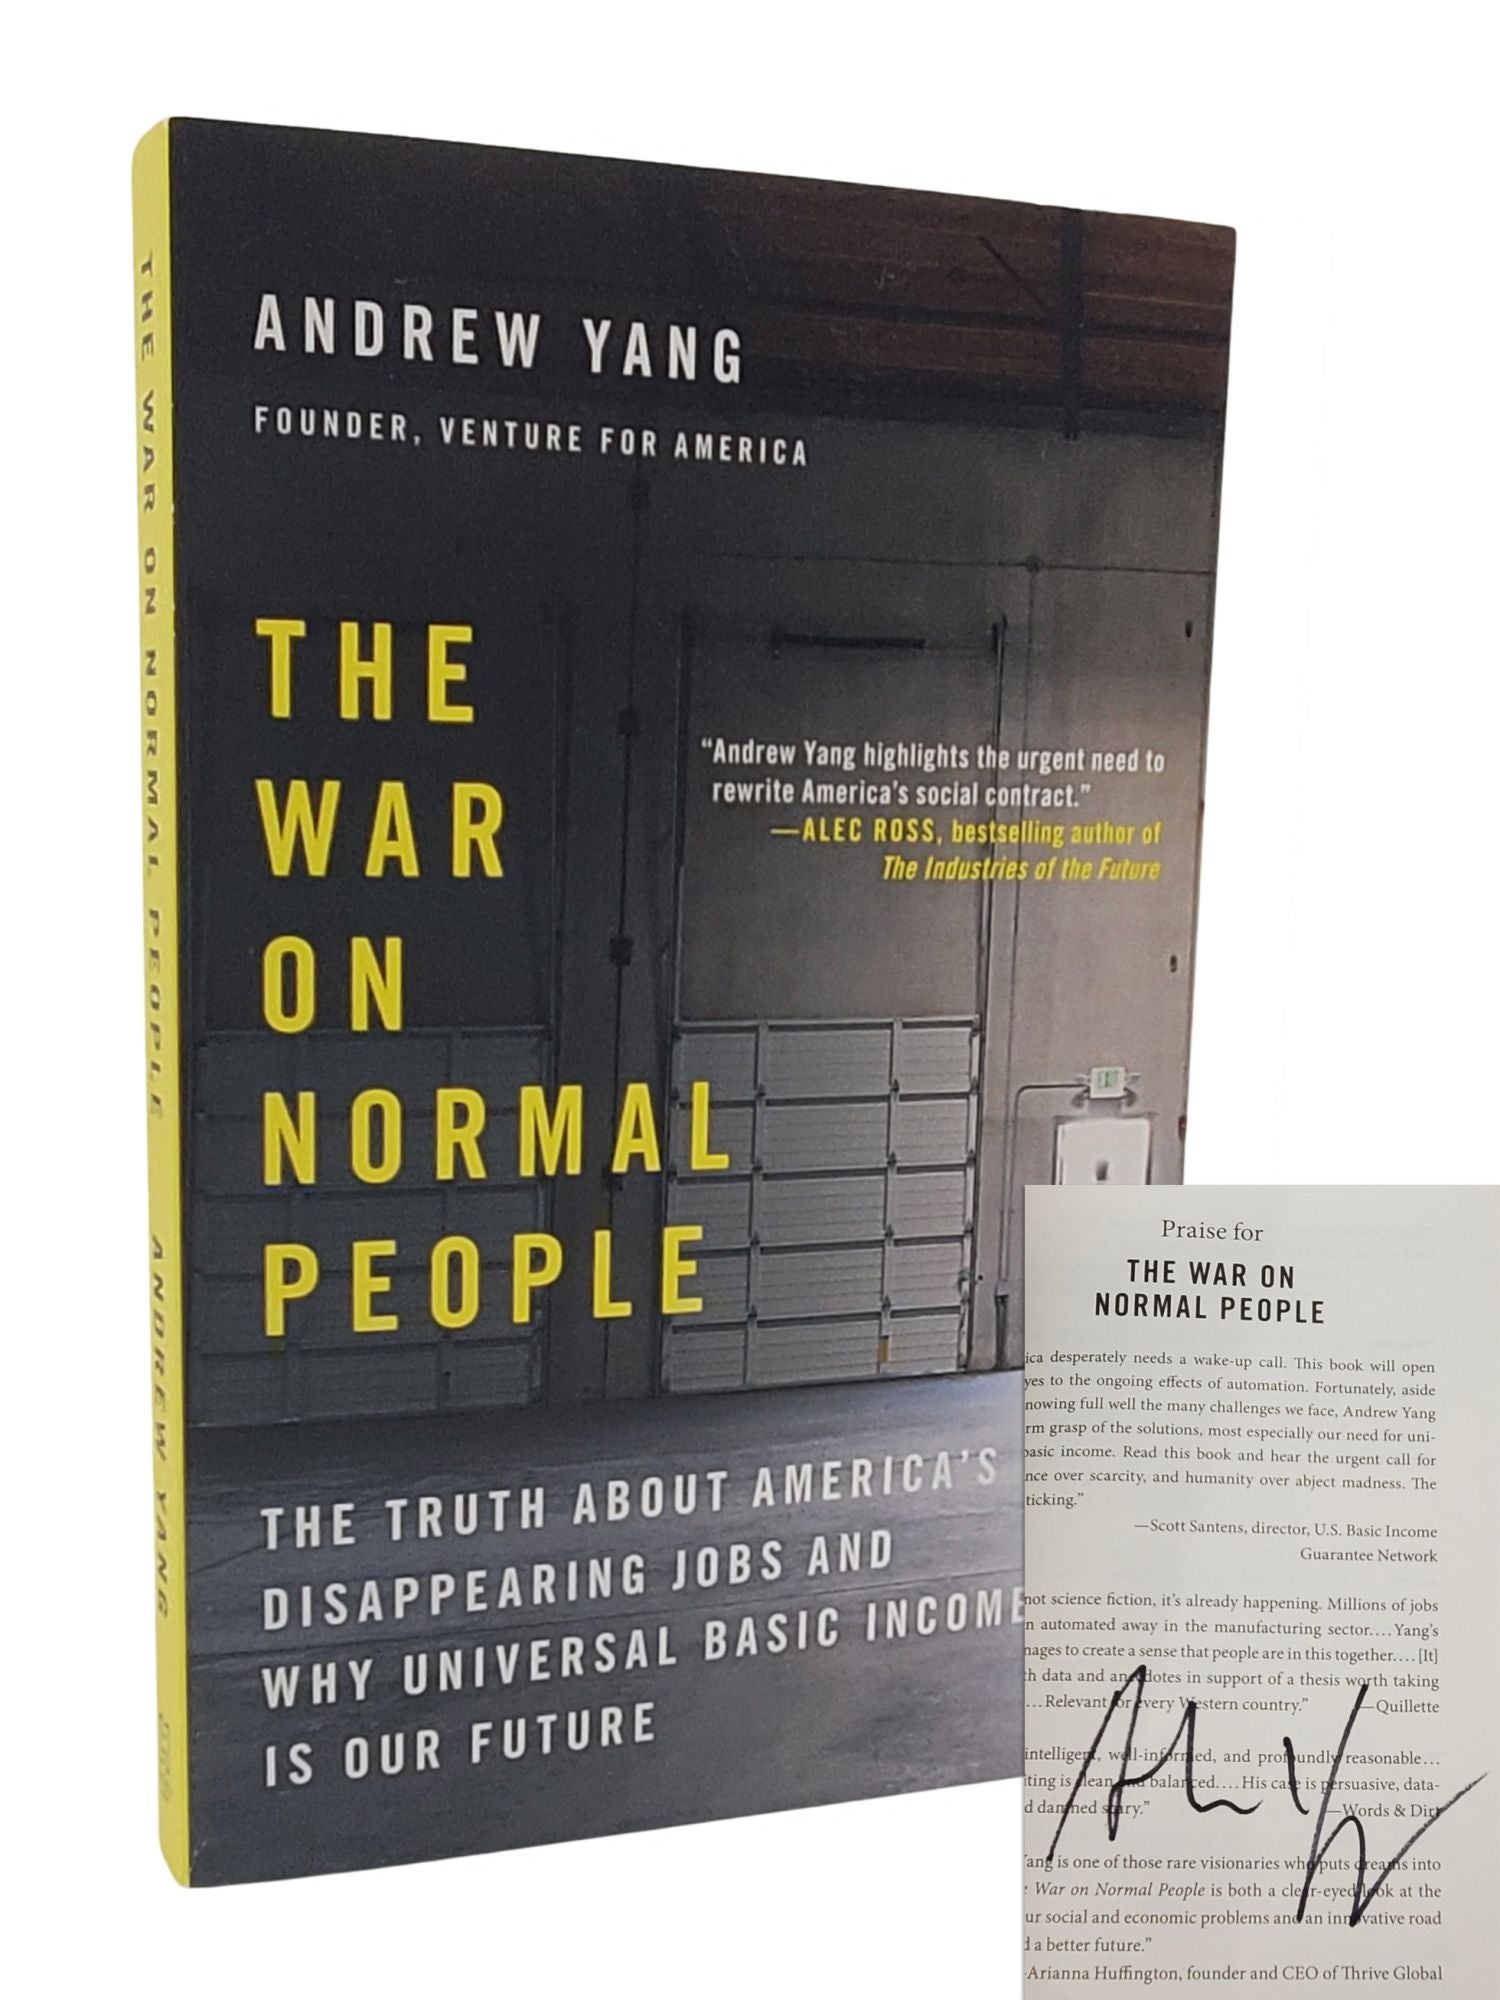 [Book #51027] THE WAR ON NORMAL PEOPLE. Andrew Yang.